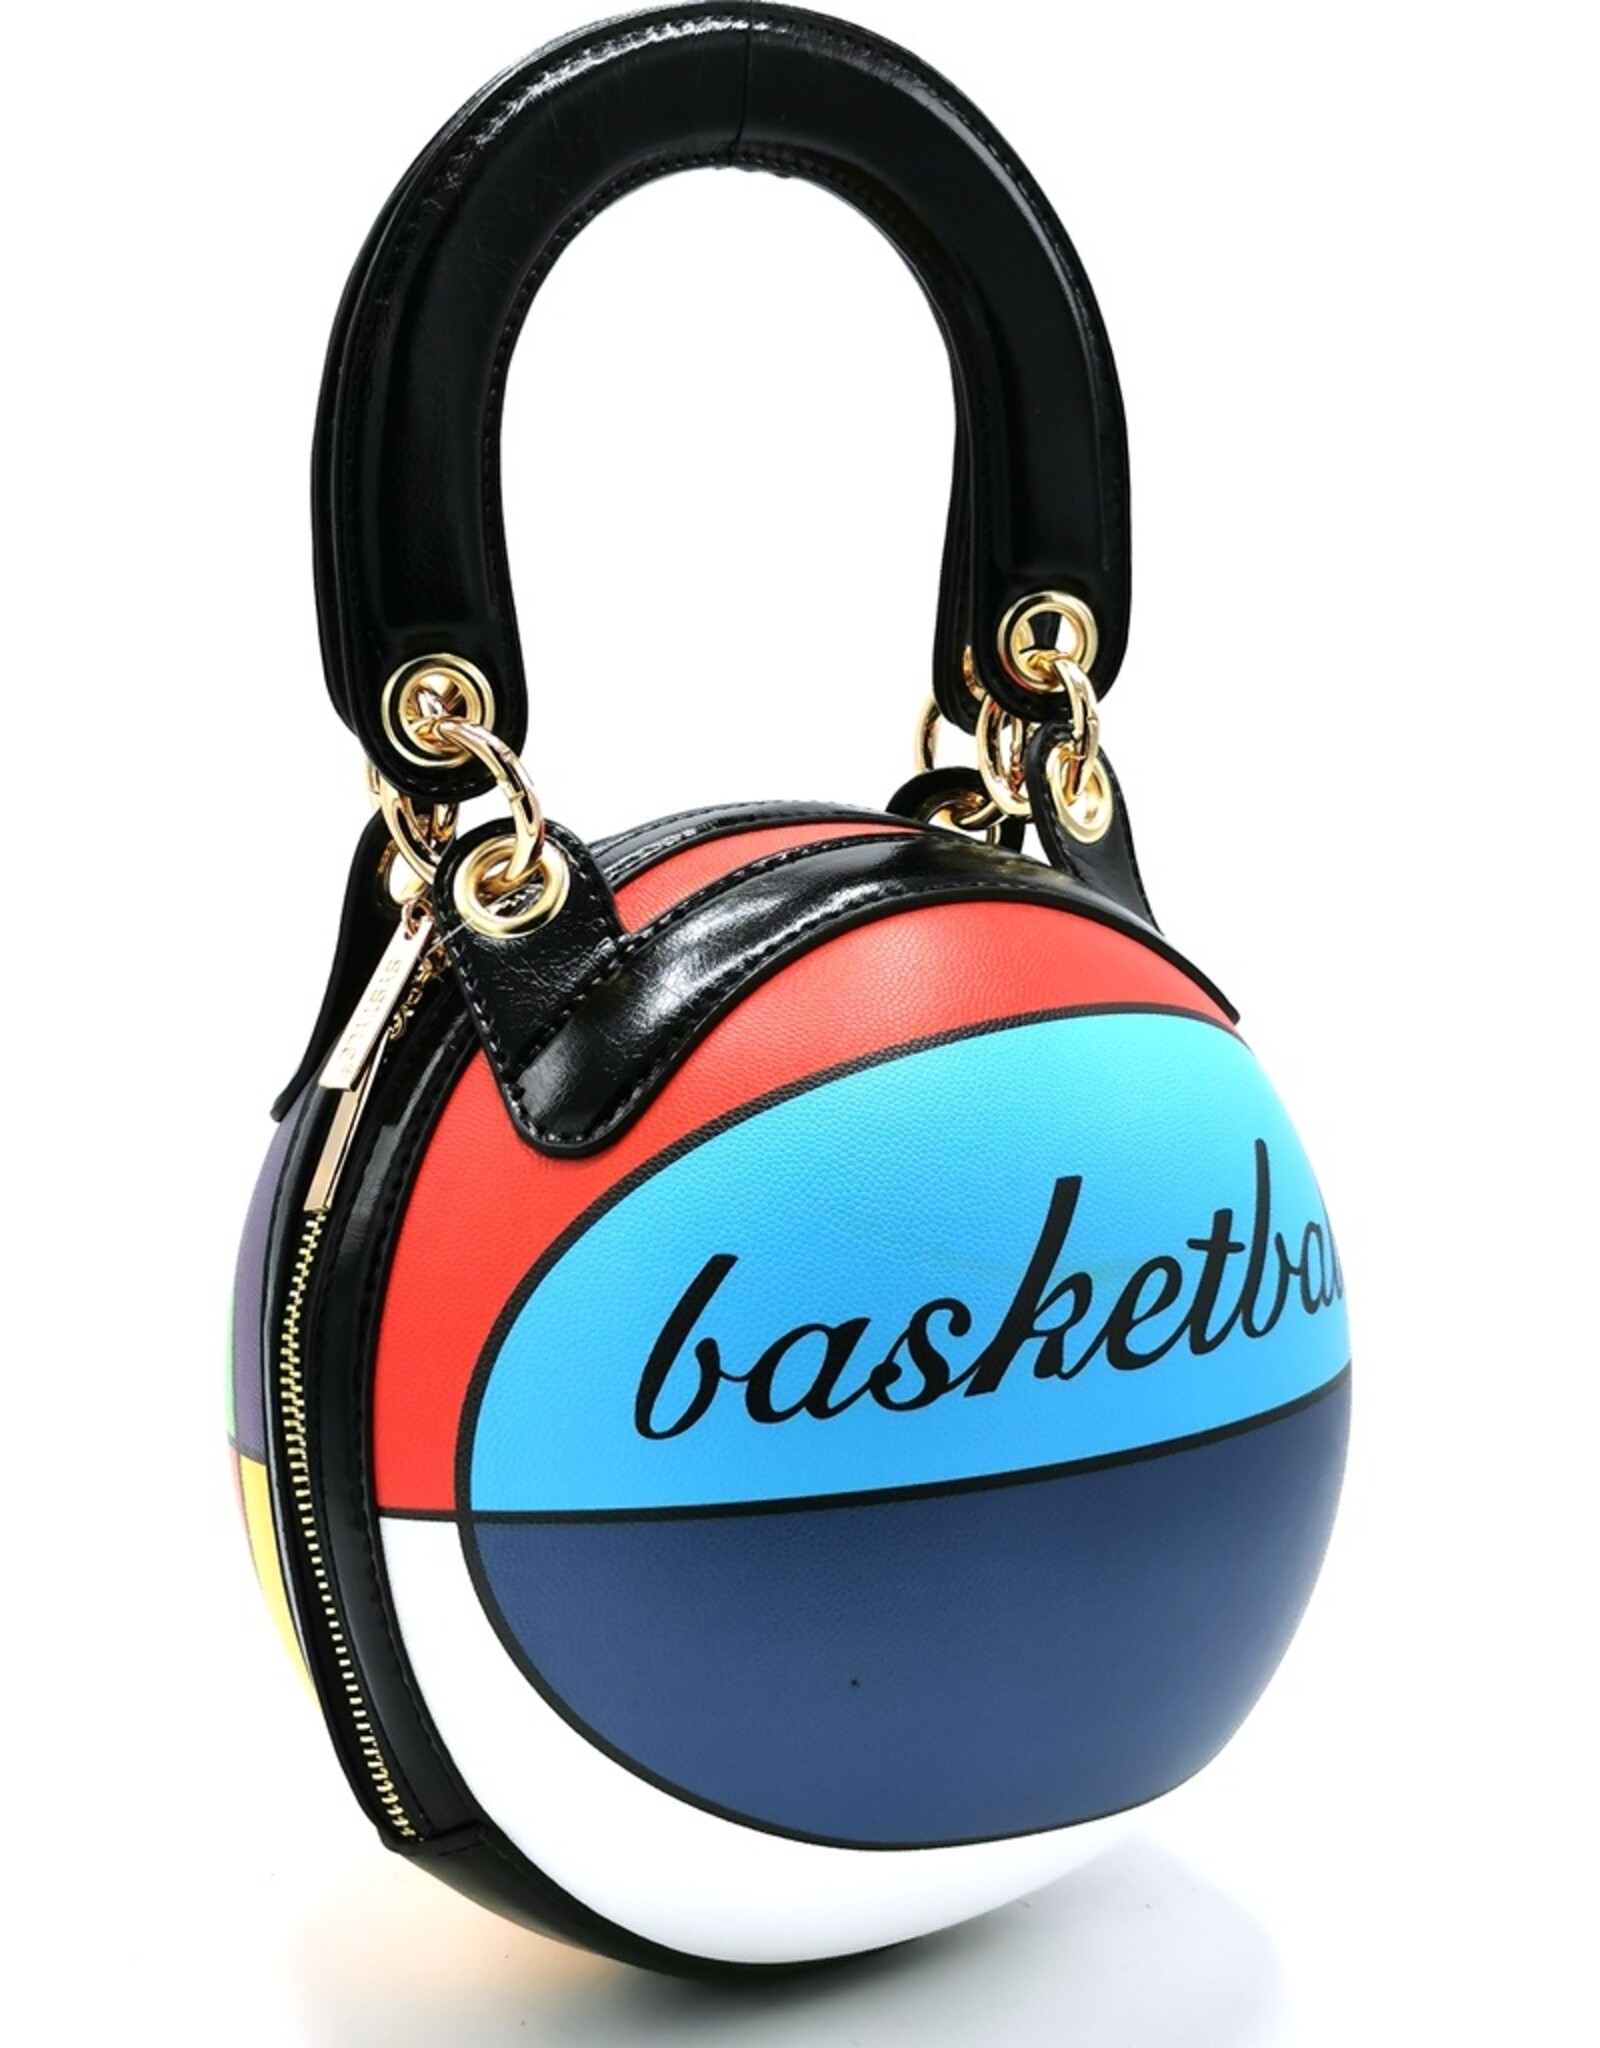 Systyle Fantasy bags - Fantasy bag Basketball Purple/red